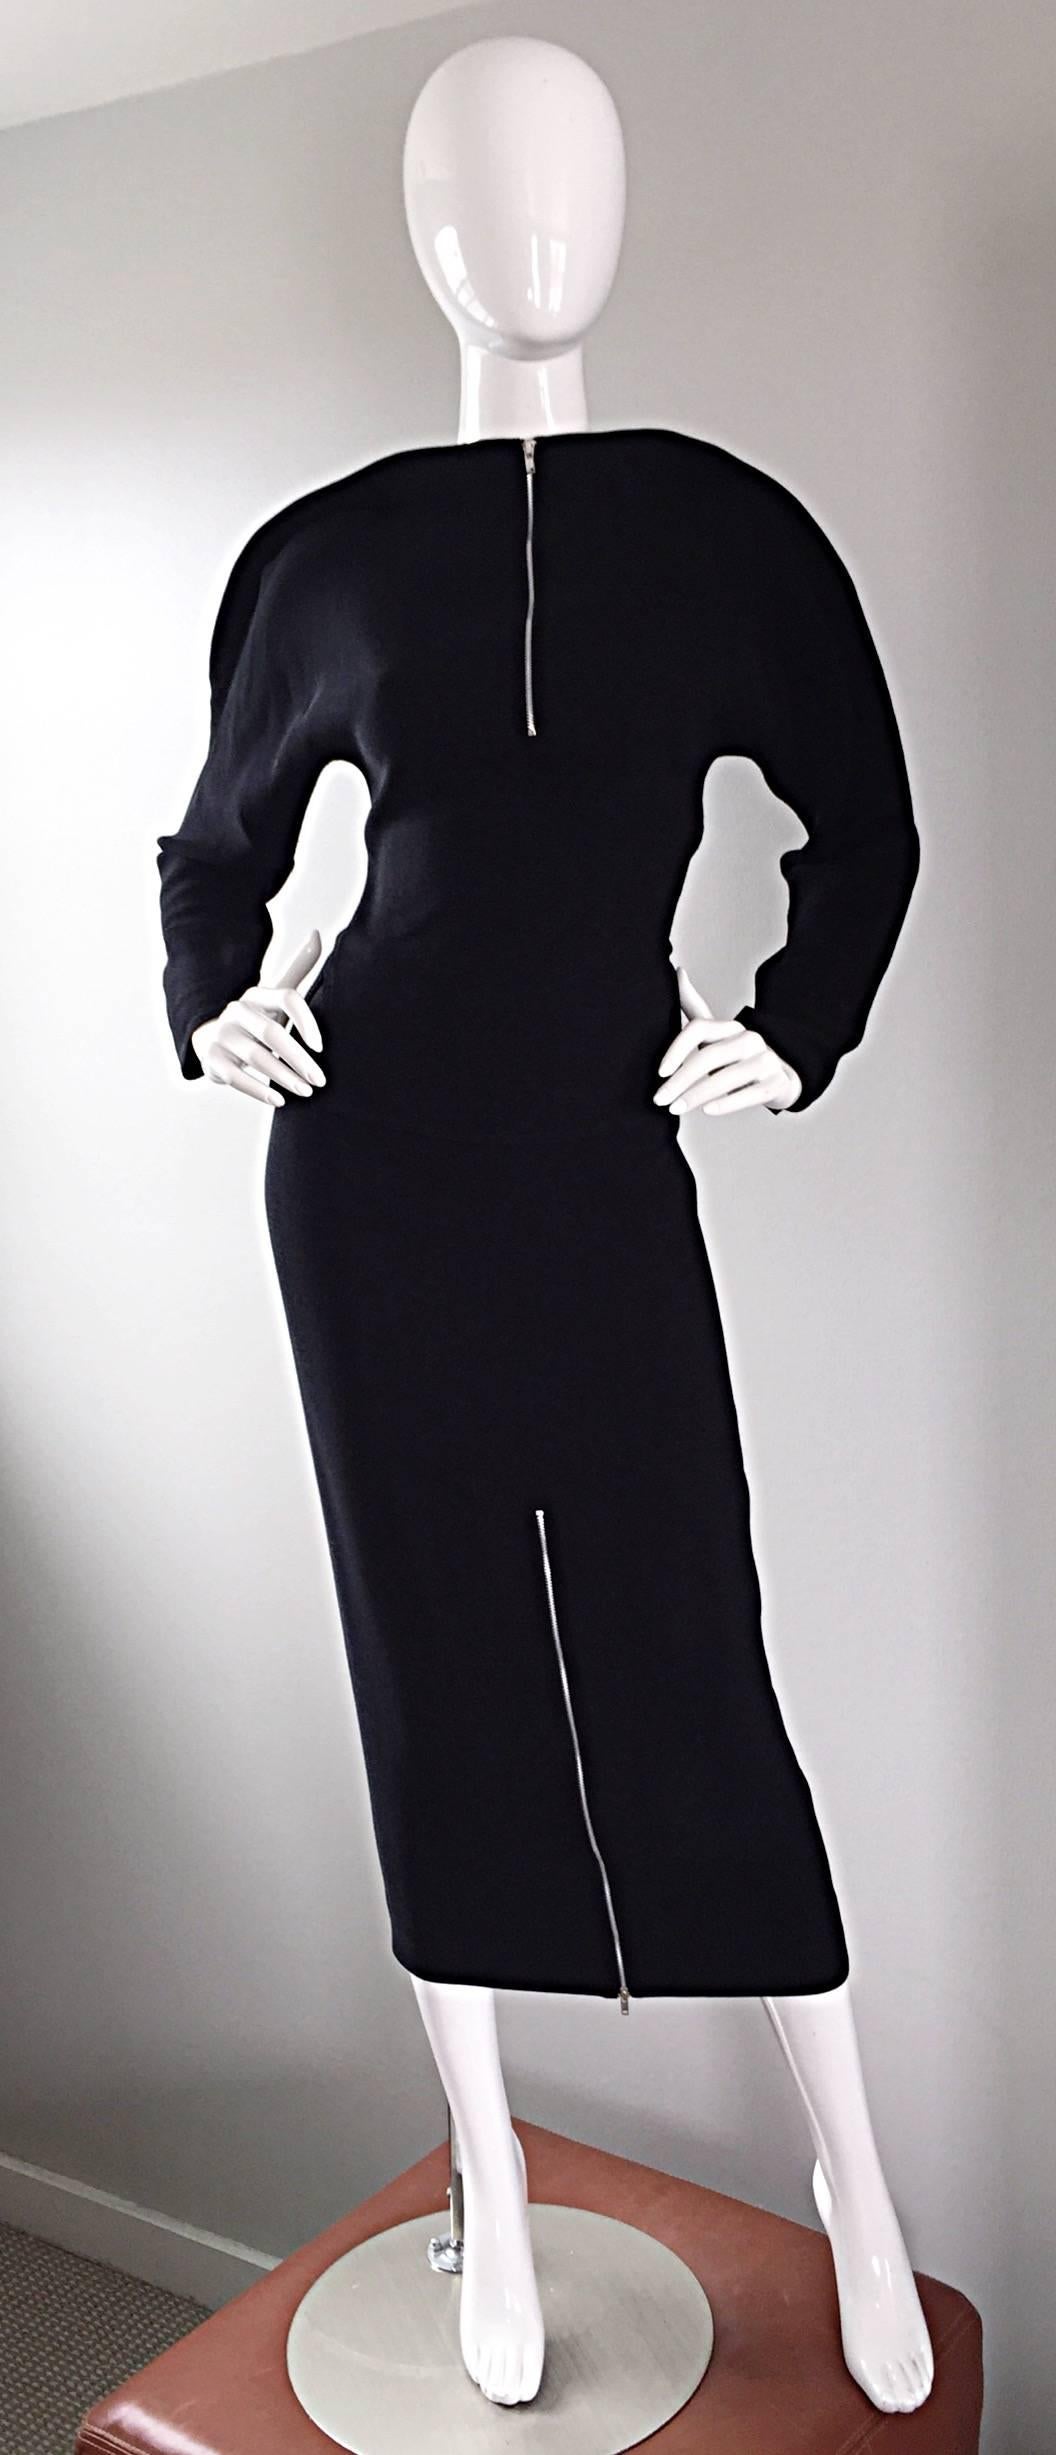 Important, and super rare vintage early 90s GEOFFREY BEENE minimalist 'zipper' ensemble! Features a black crepe top, with two vents on either side of the waist. Functional silver metal zipper up the front, which can also be left partially open.